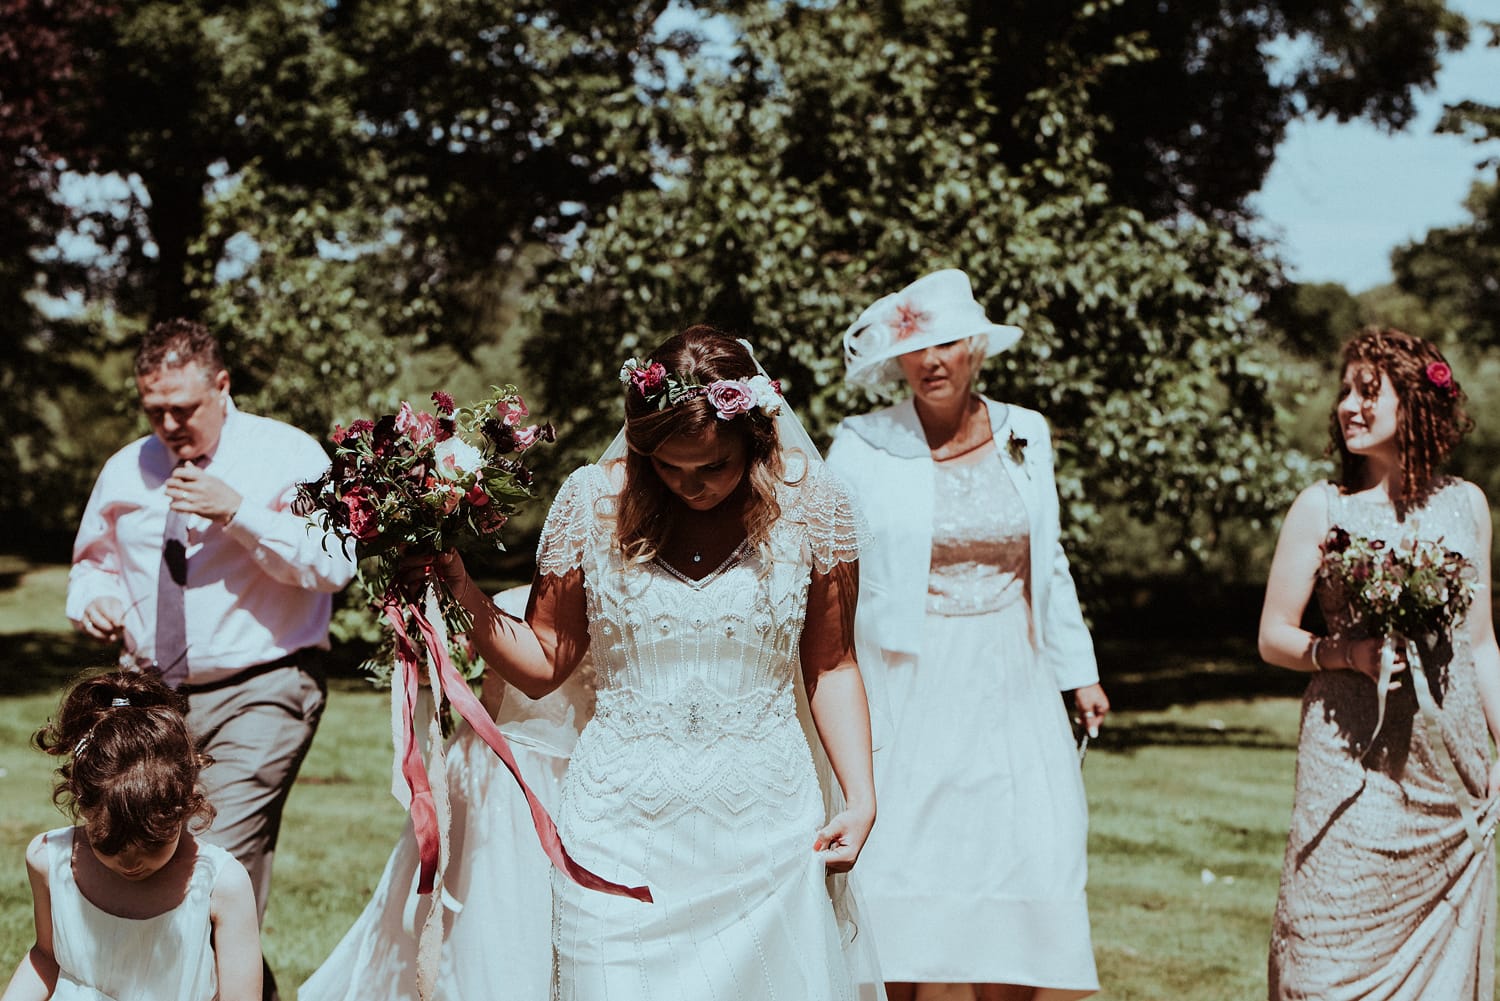 Sunny and Vintage-Inspired Wedding in Medieval Ruins - Maggie Bride Verity wearing Ettia by Maggie Sottero